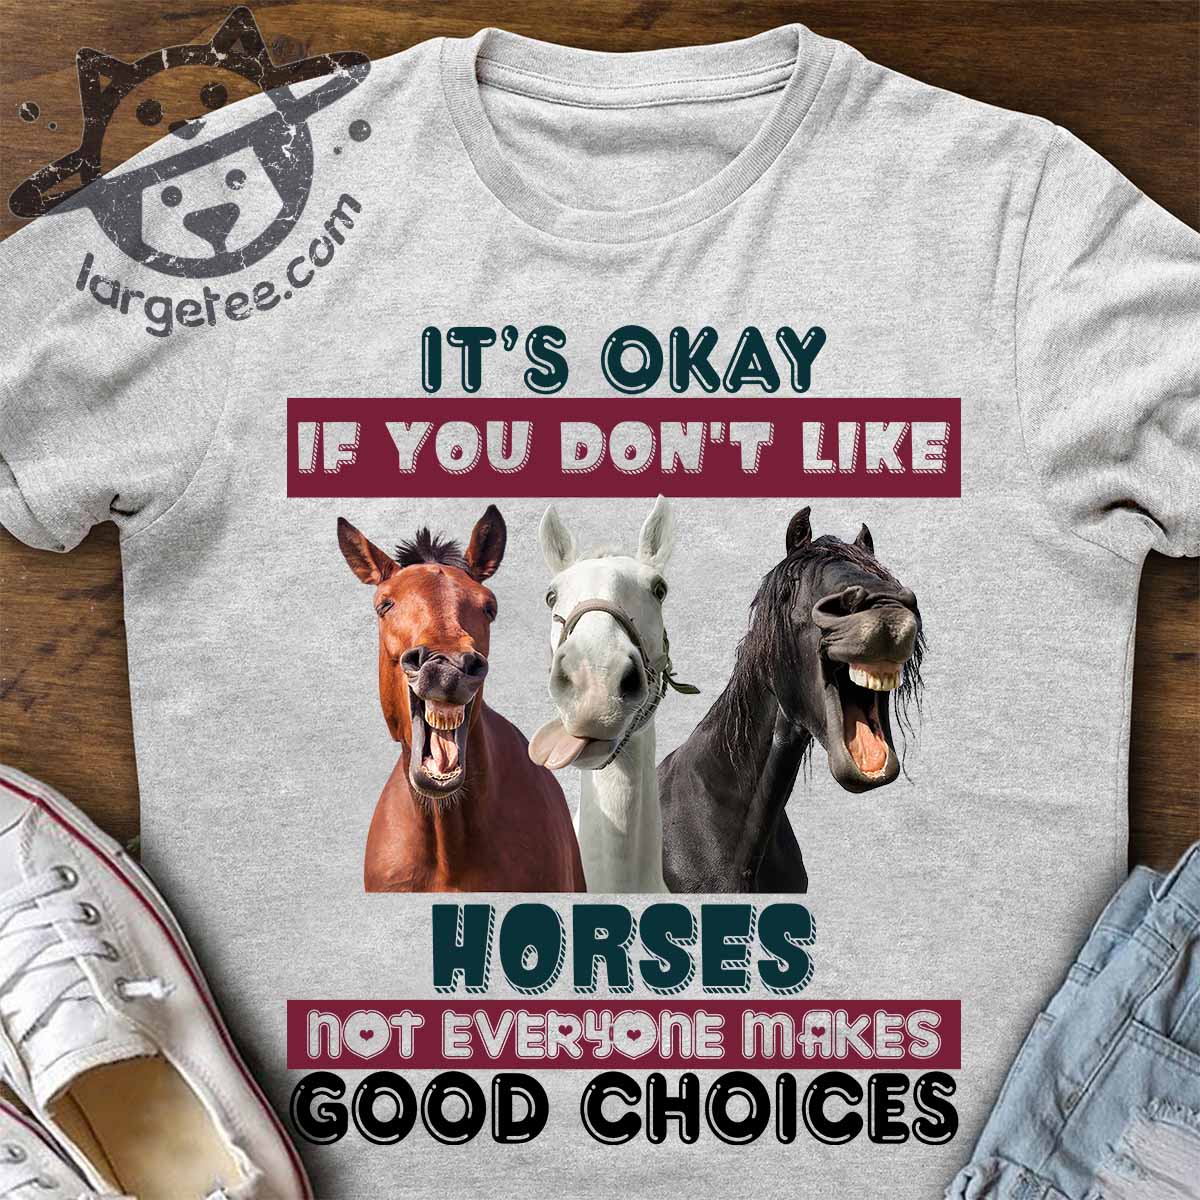 It's okay if you don't like horses not everyone makes good choices